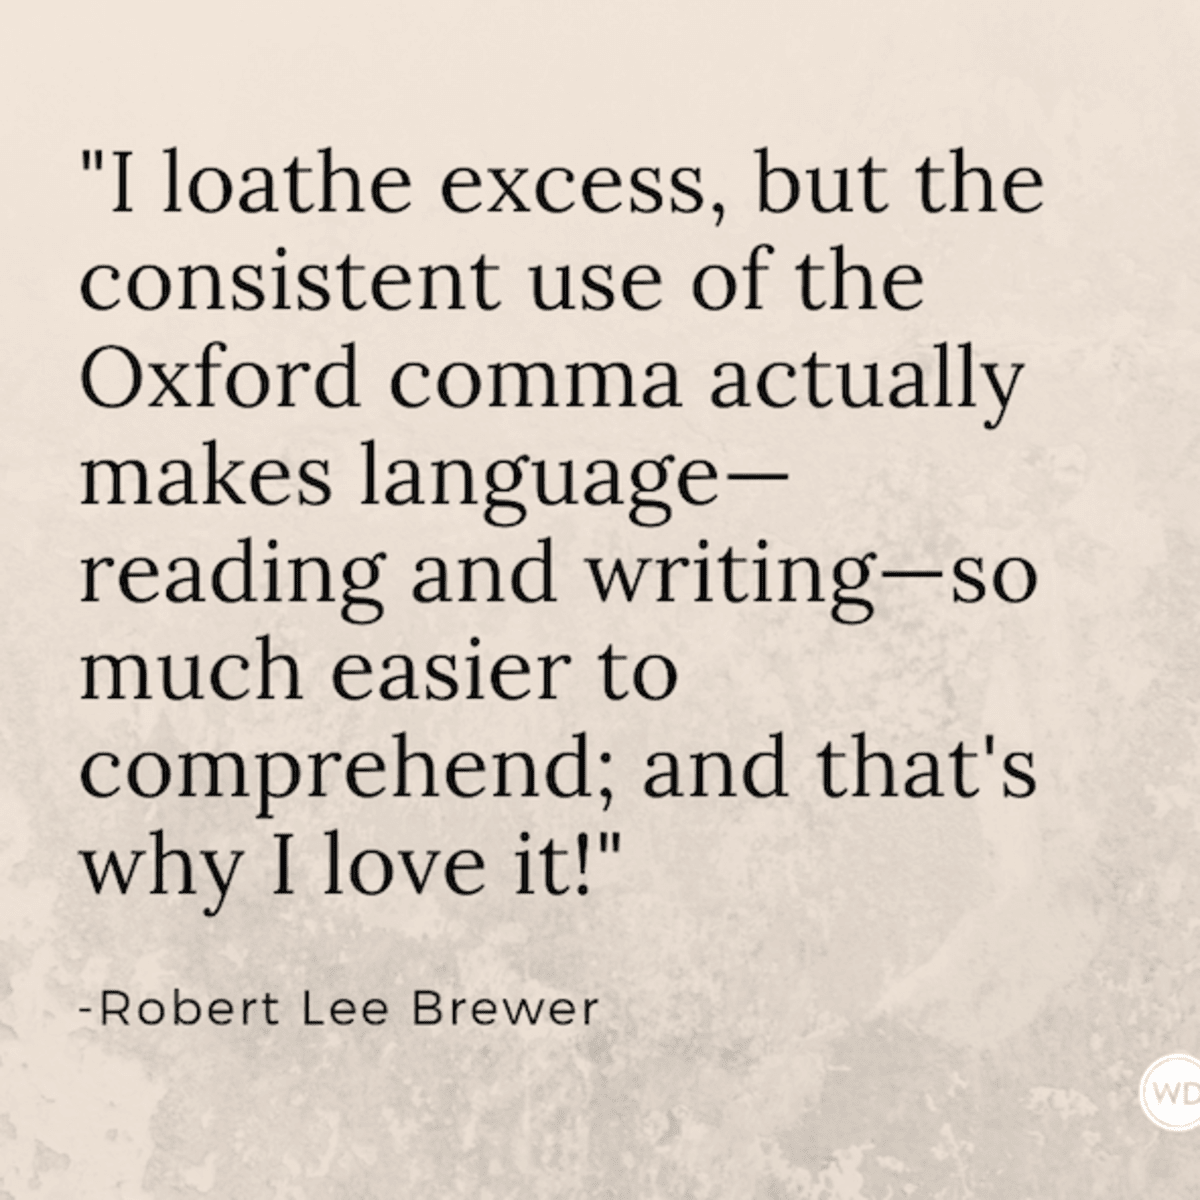 What Is the Oxford Comma (or Serial Comma)?